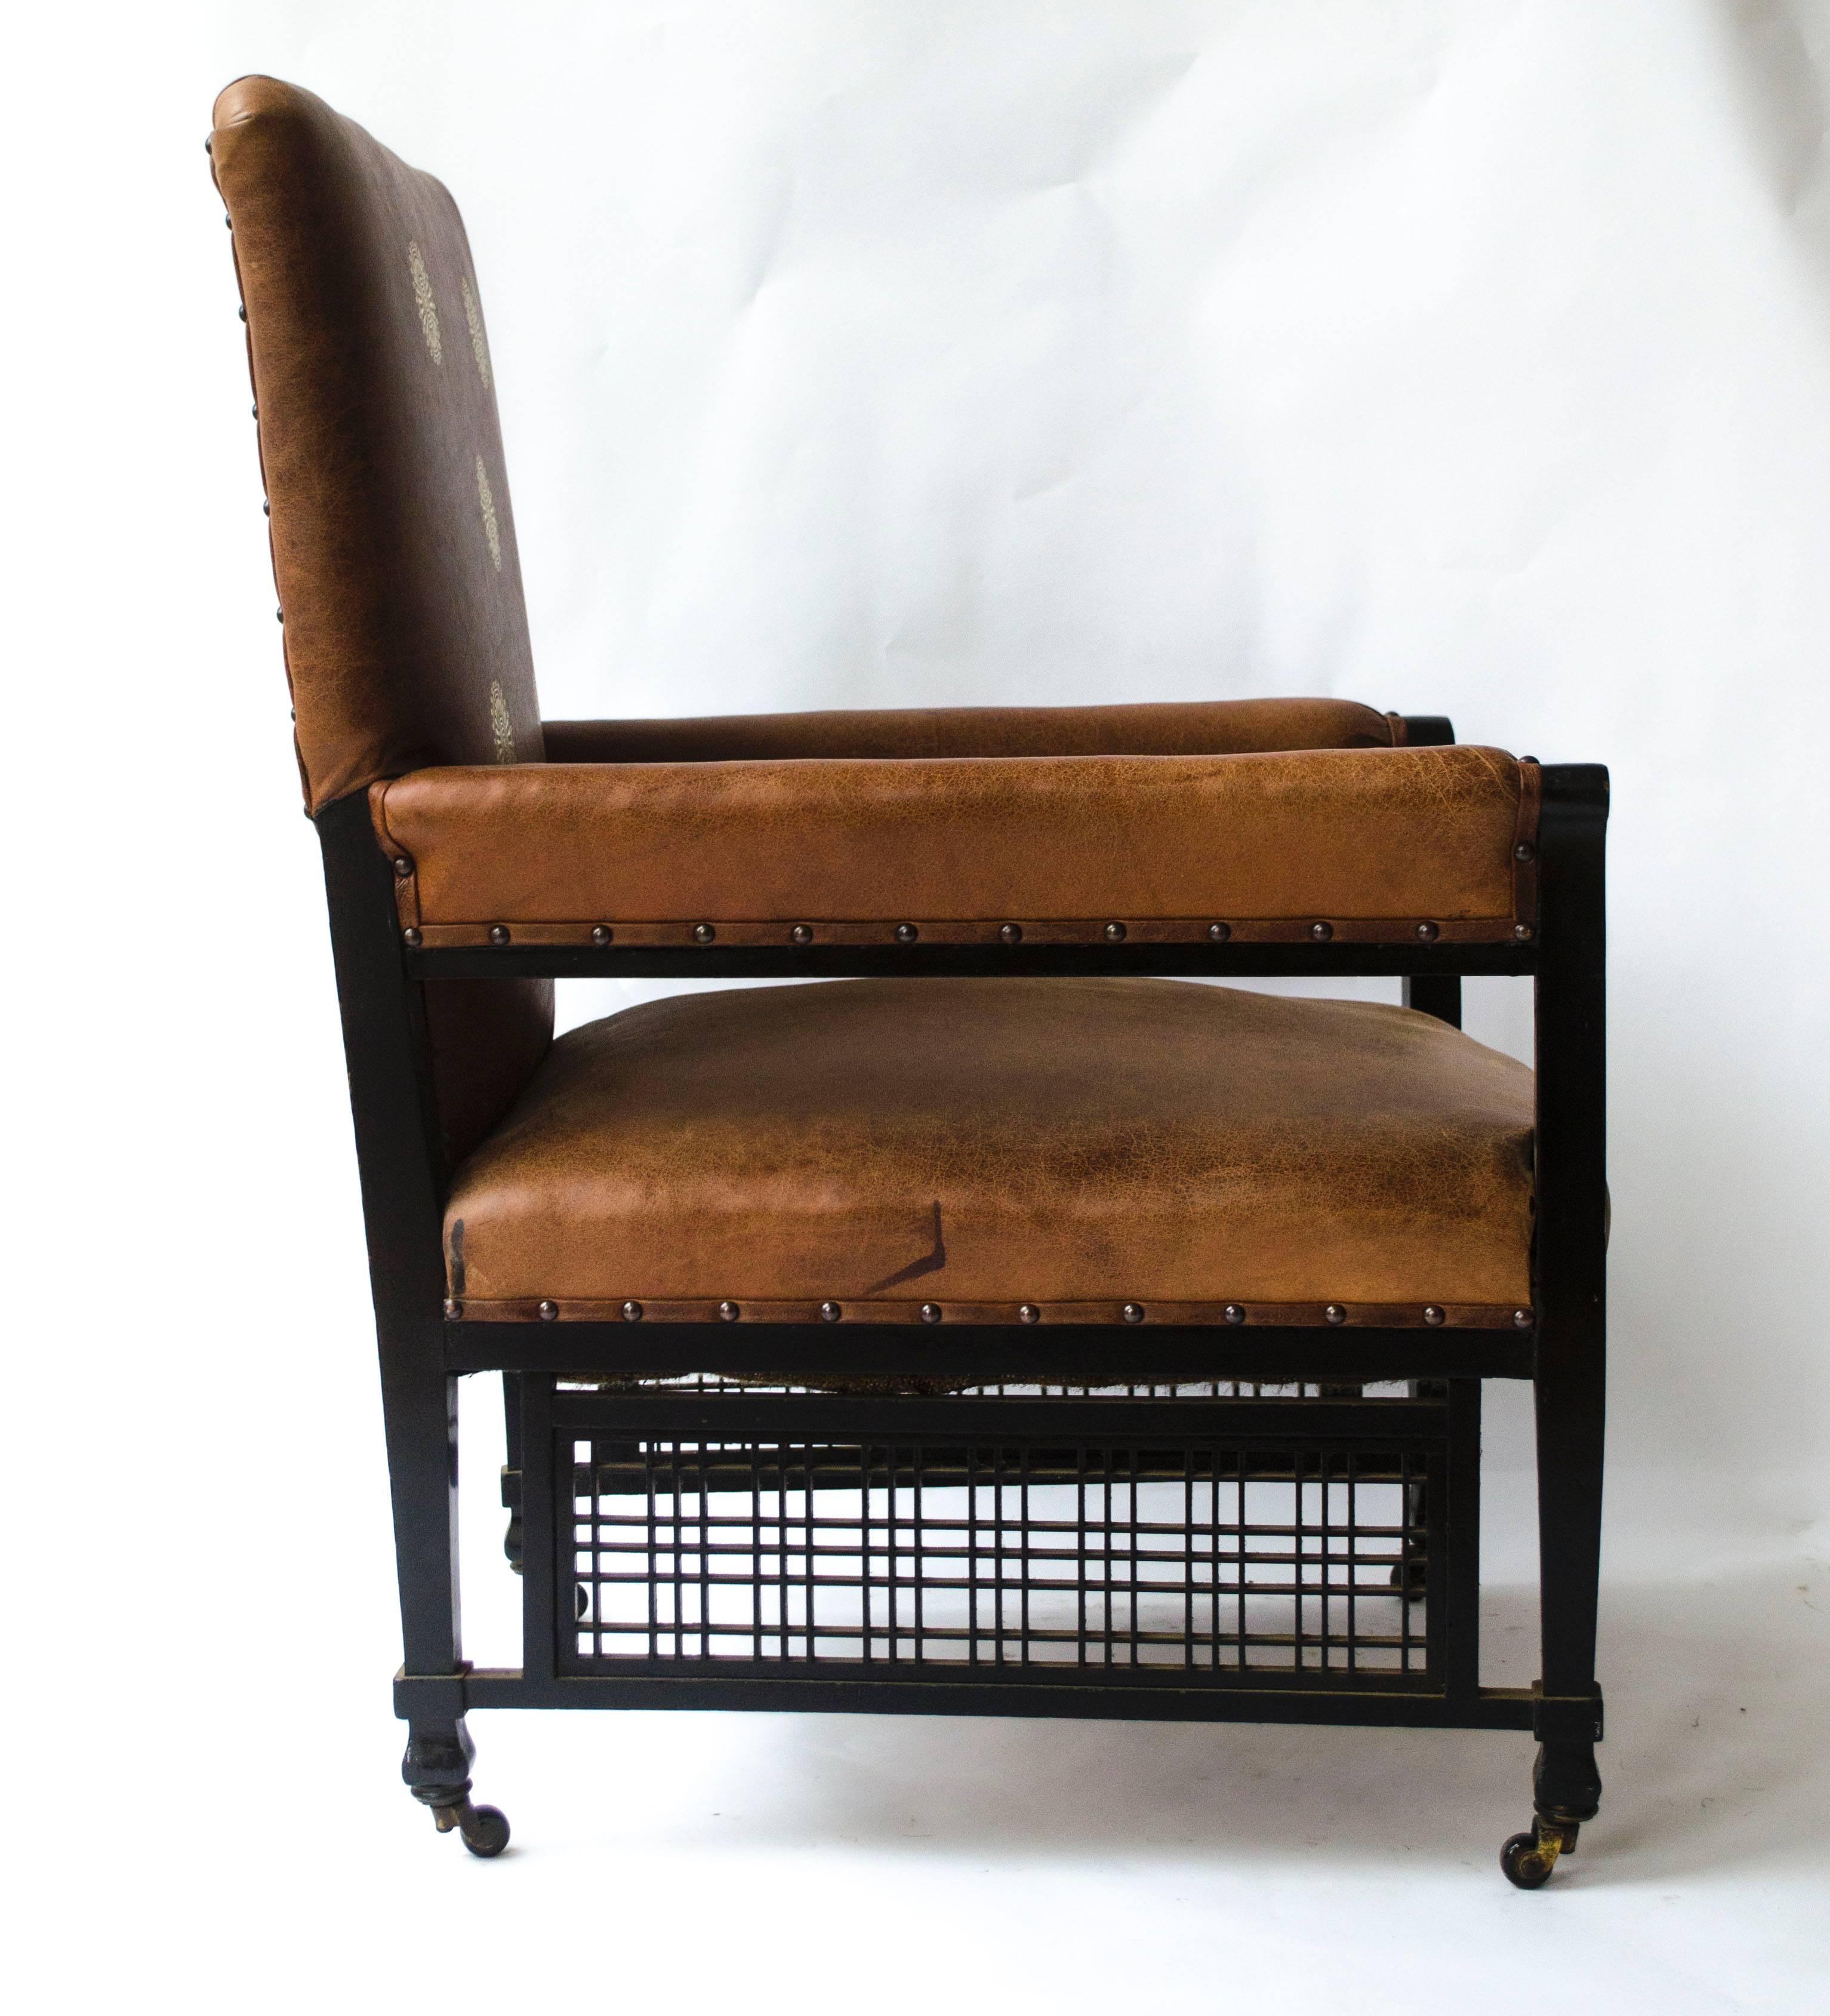 EW Godwin Design. Attr. An Anglo-Japanese armchair with slightly curved pagoda shaped arms and fine lattice detailing to the lower sides with uniting stretchers to the square legs on original brass and ceramic castors. 
We have had this armchair